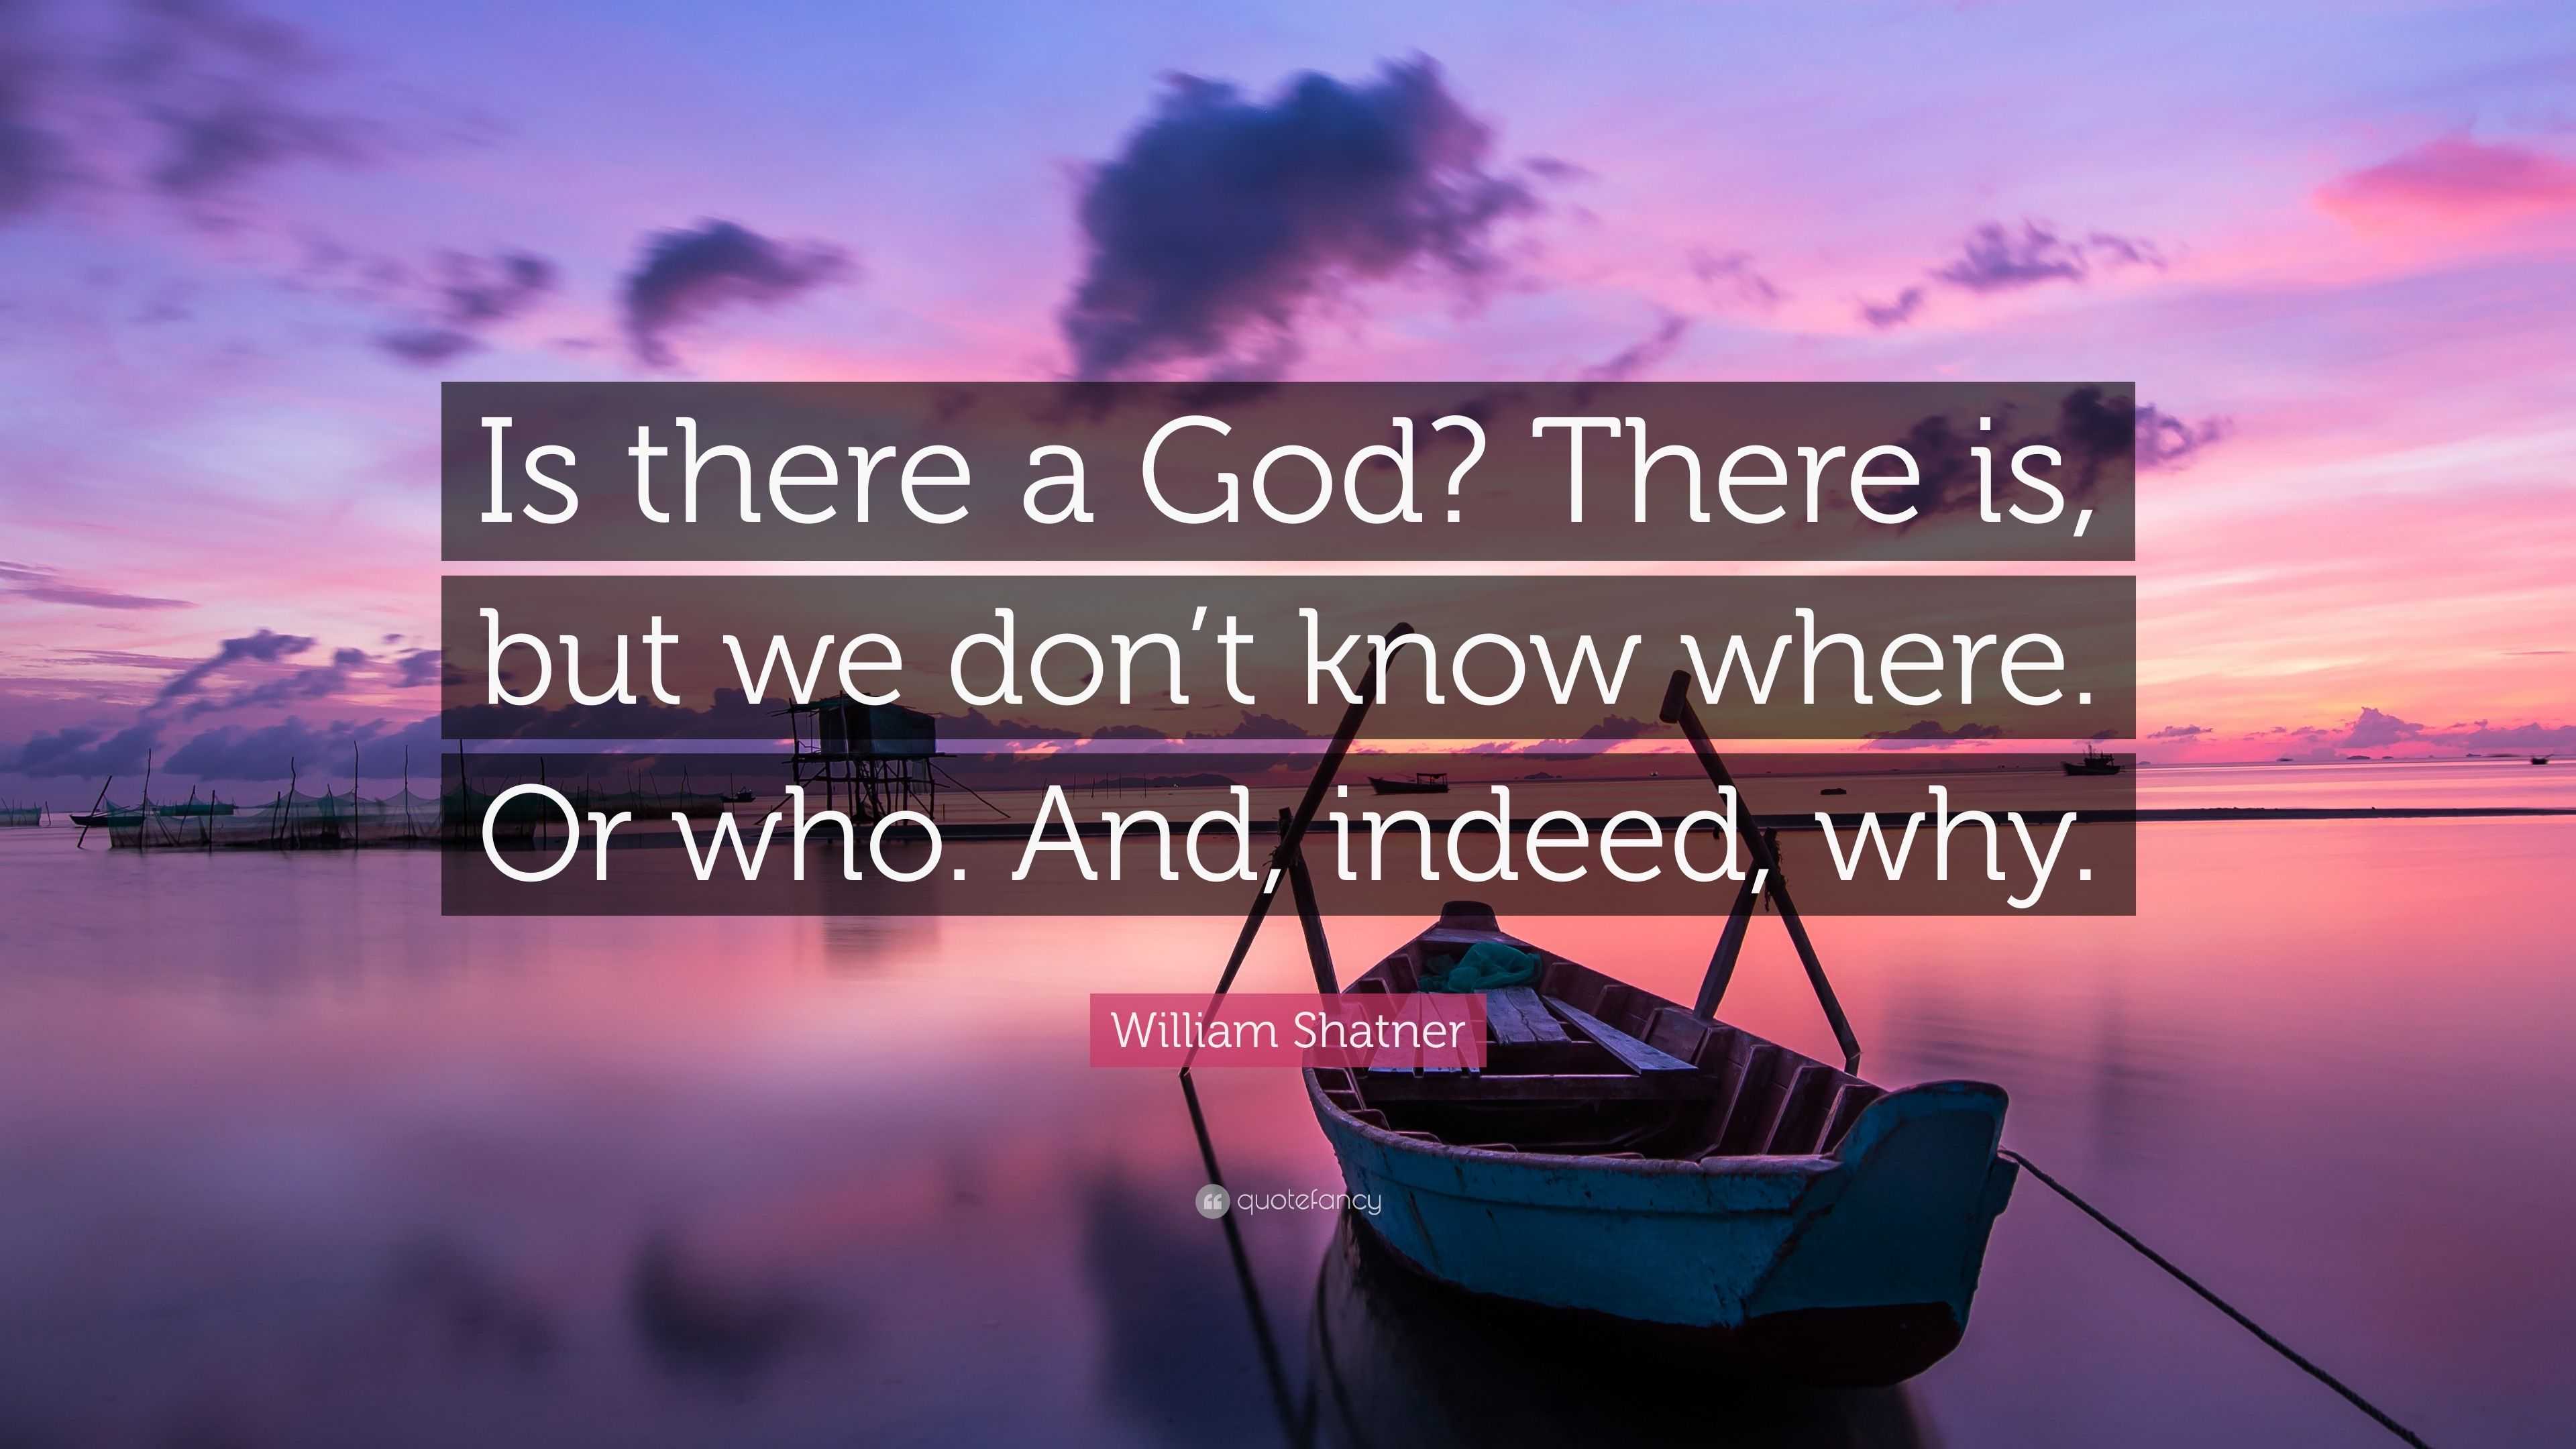 William Shatner Quote: “Is there a God? There is, but we don’t know ...